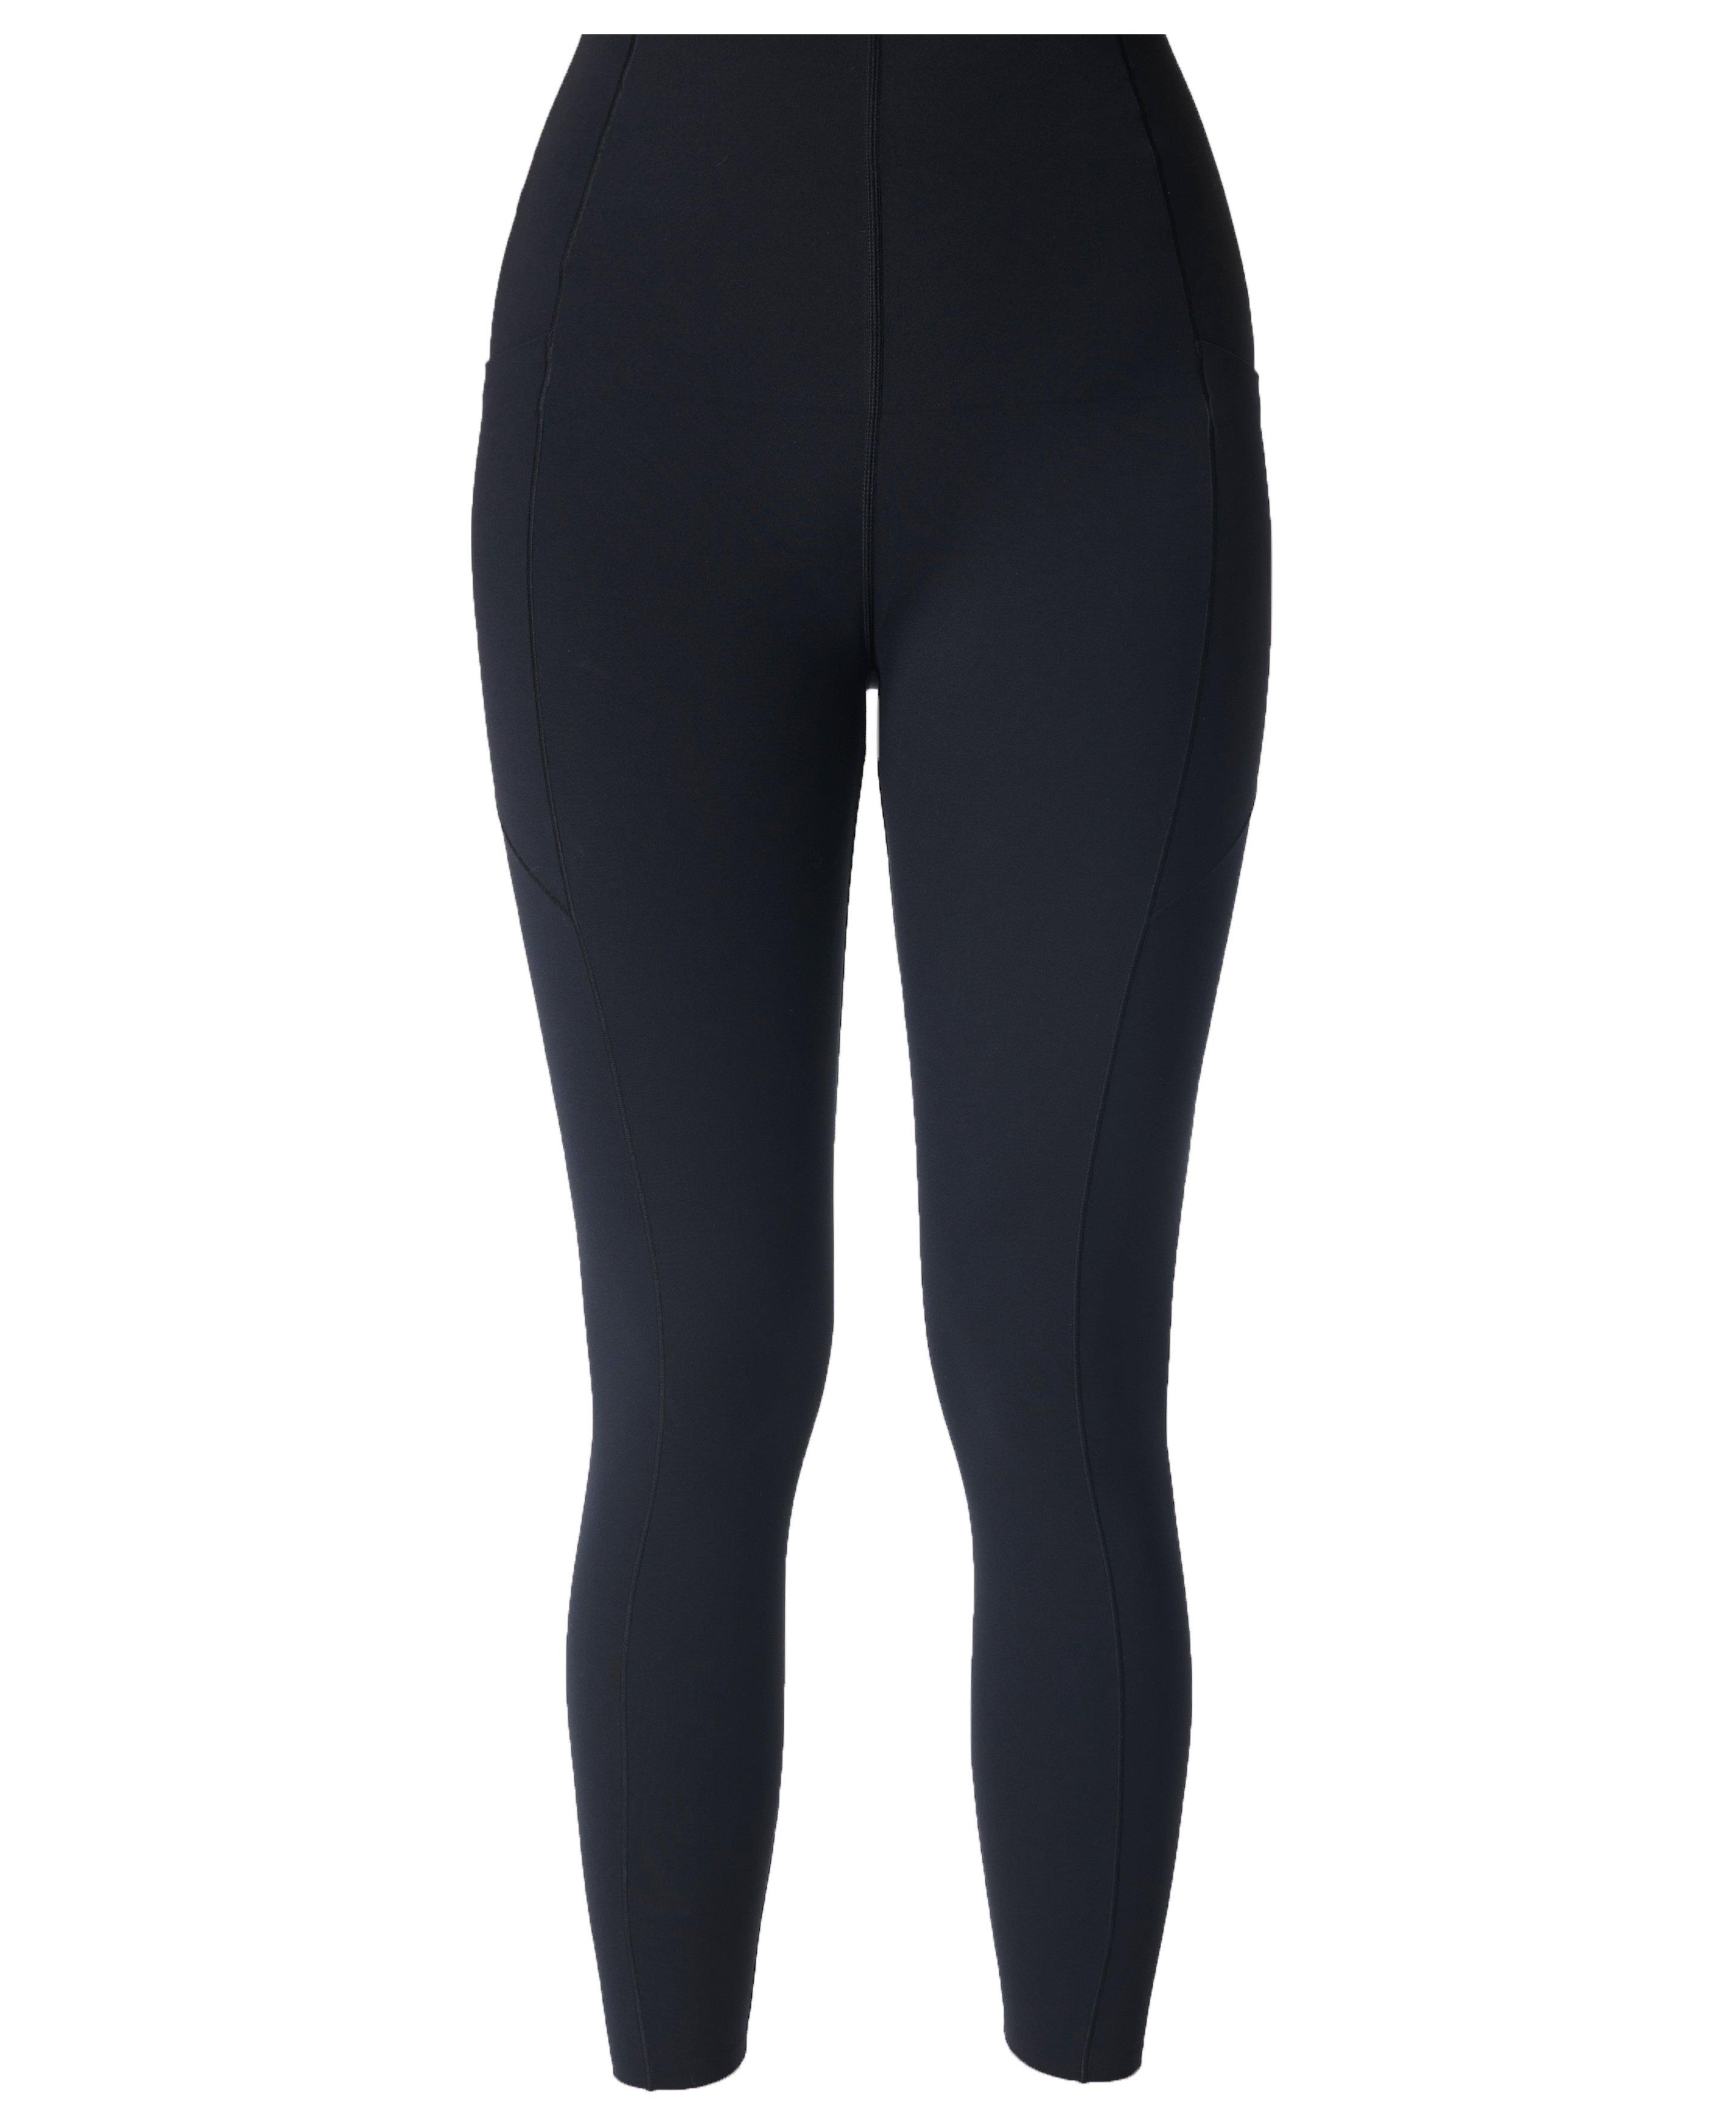 Sweaty Betty Womens Power High-Waisted Workout Leggings with Side Pockets 